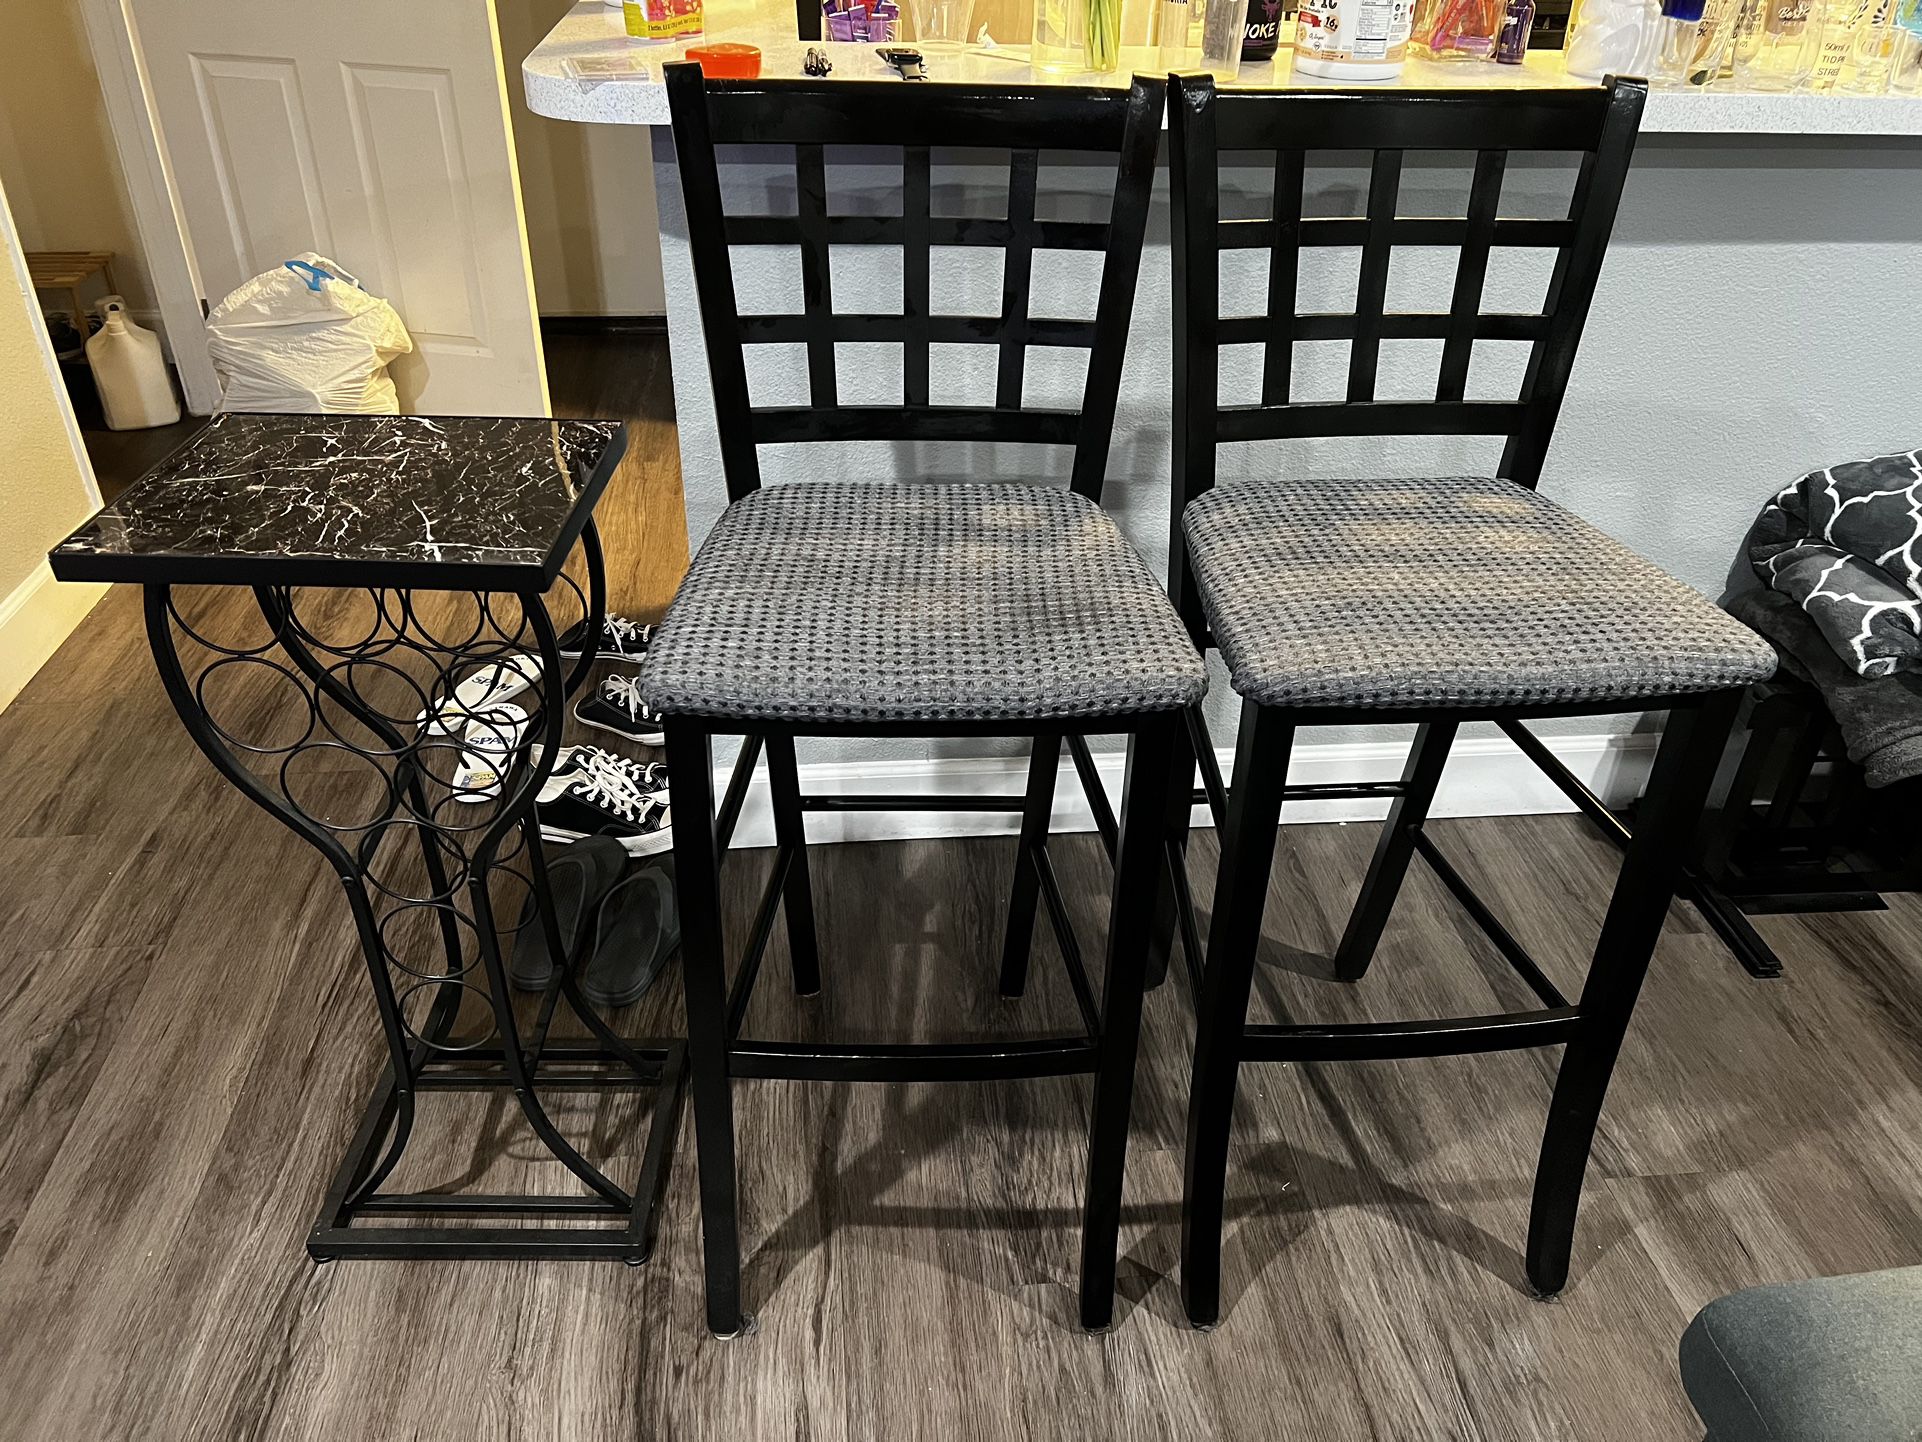 High Chairs And Wine Stand 